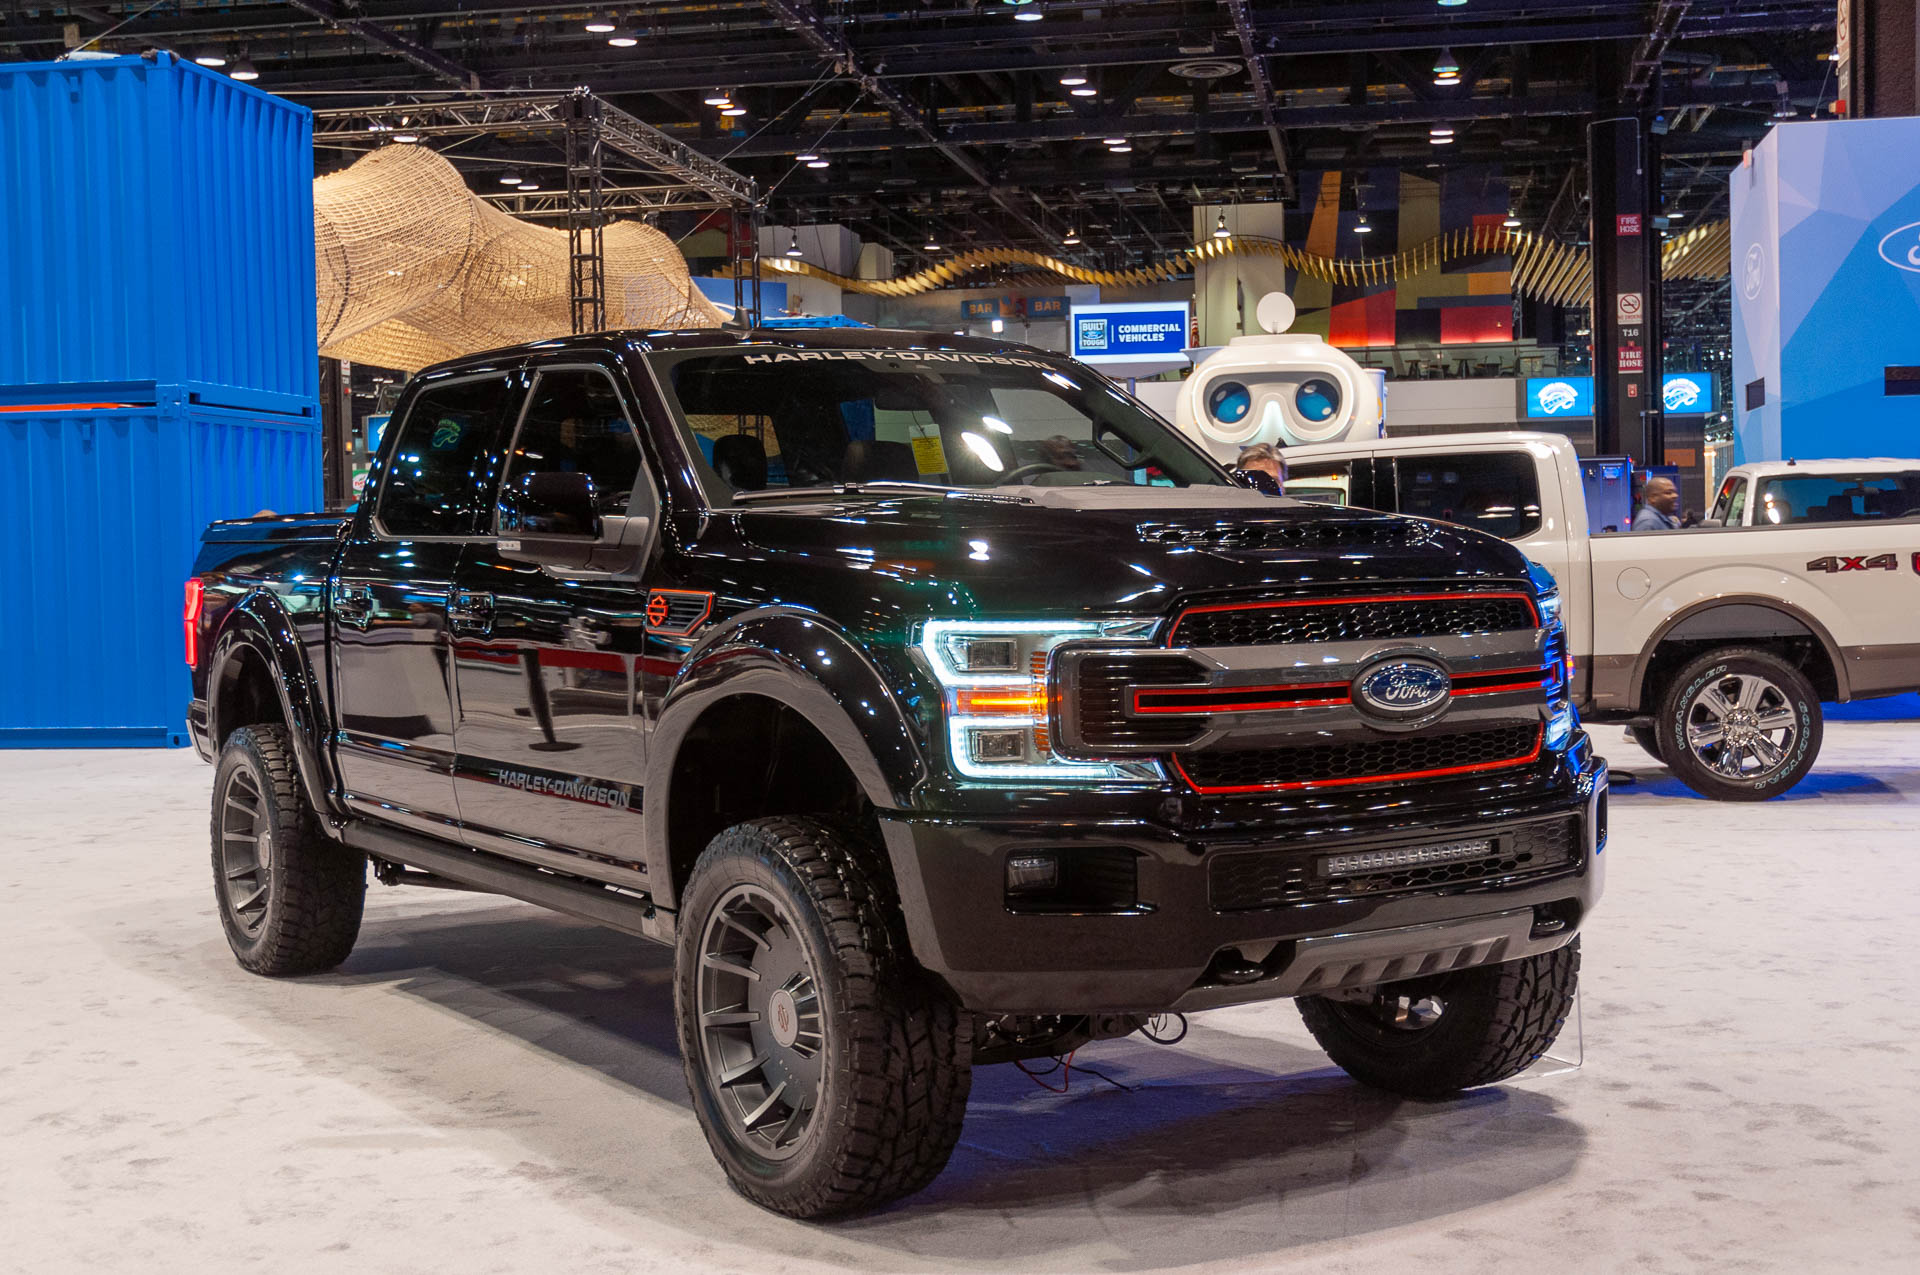 2020 Ford F150 HarleyDavidson arrives with 700plus supercharged